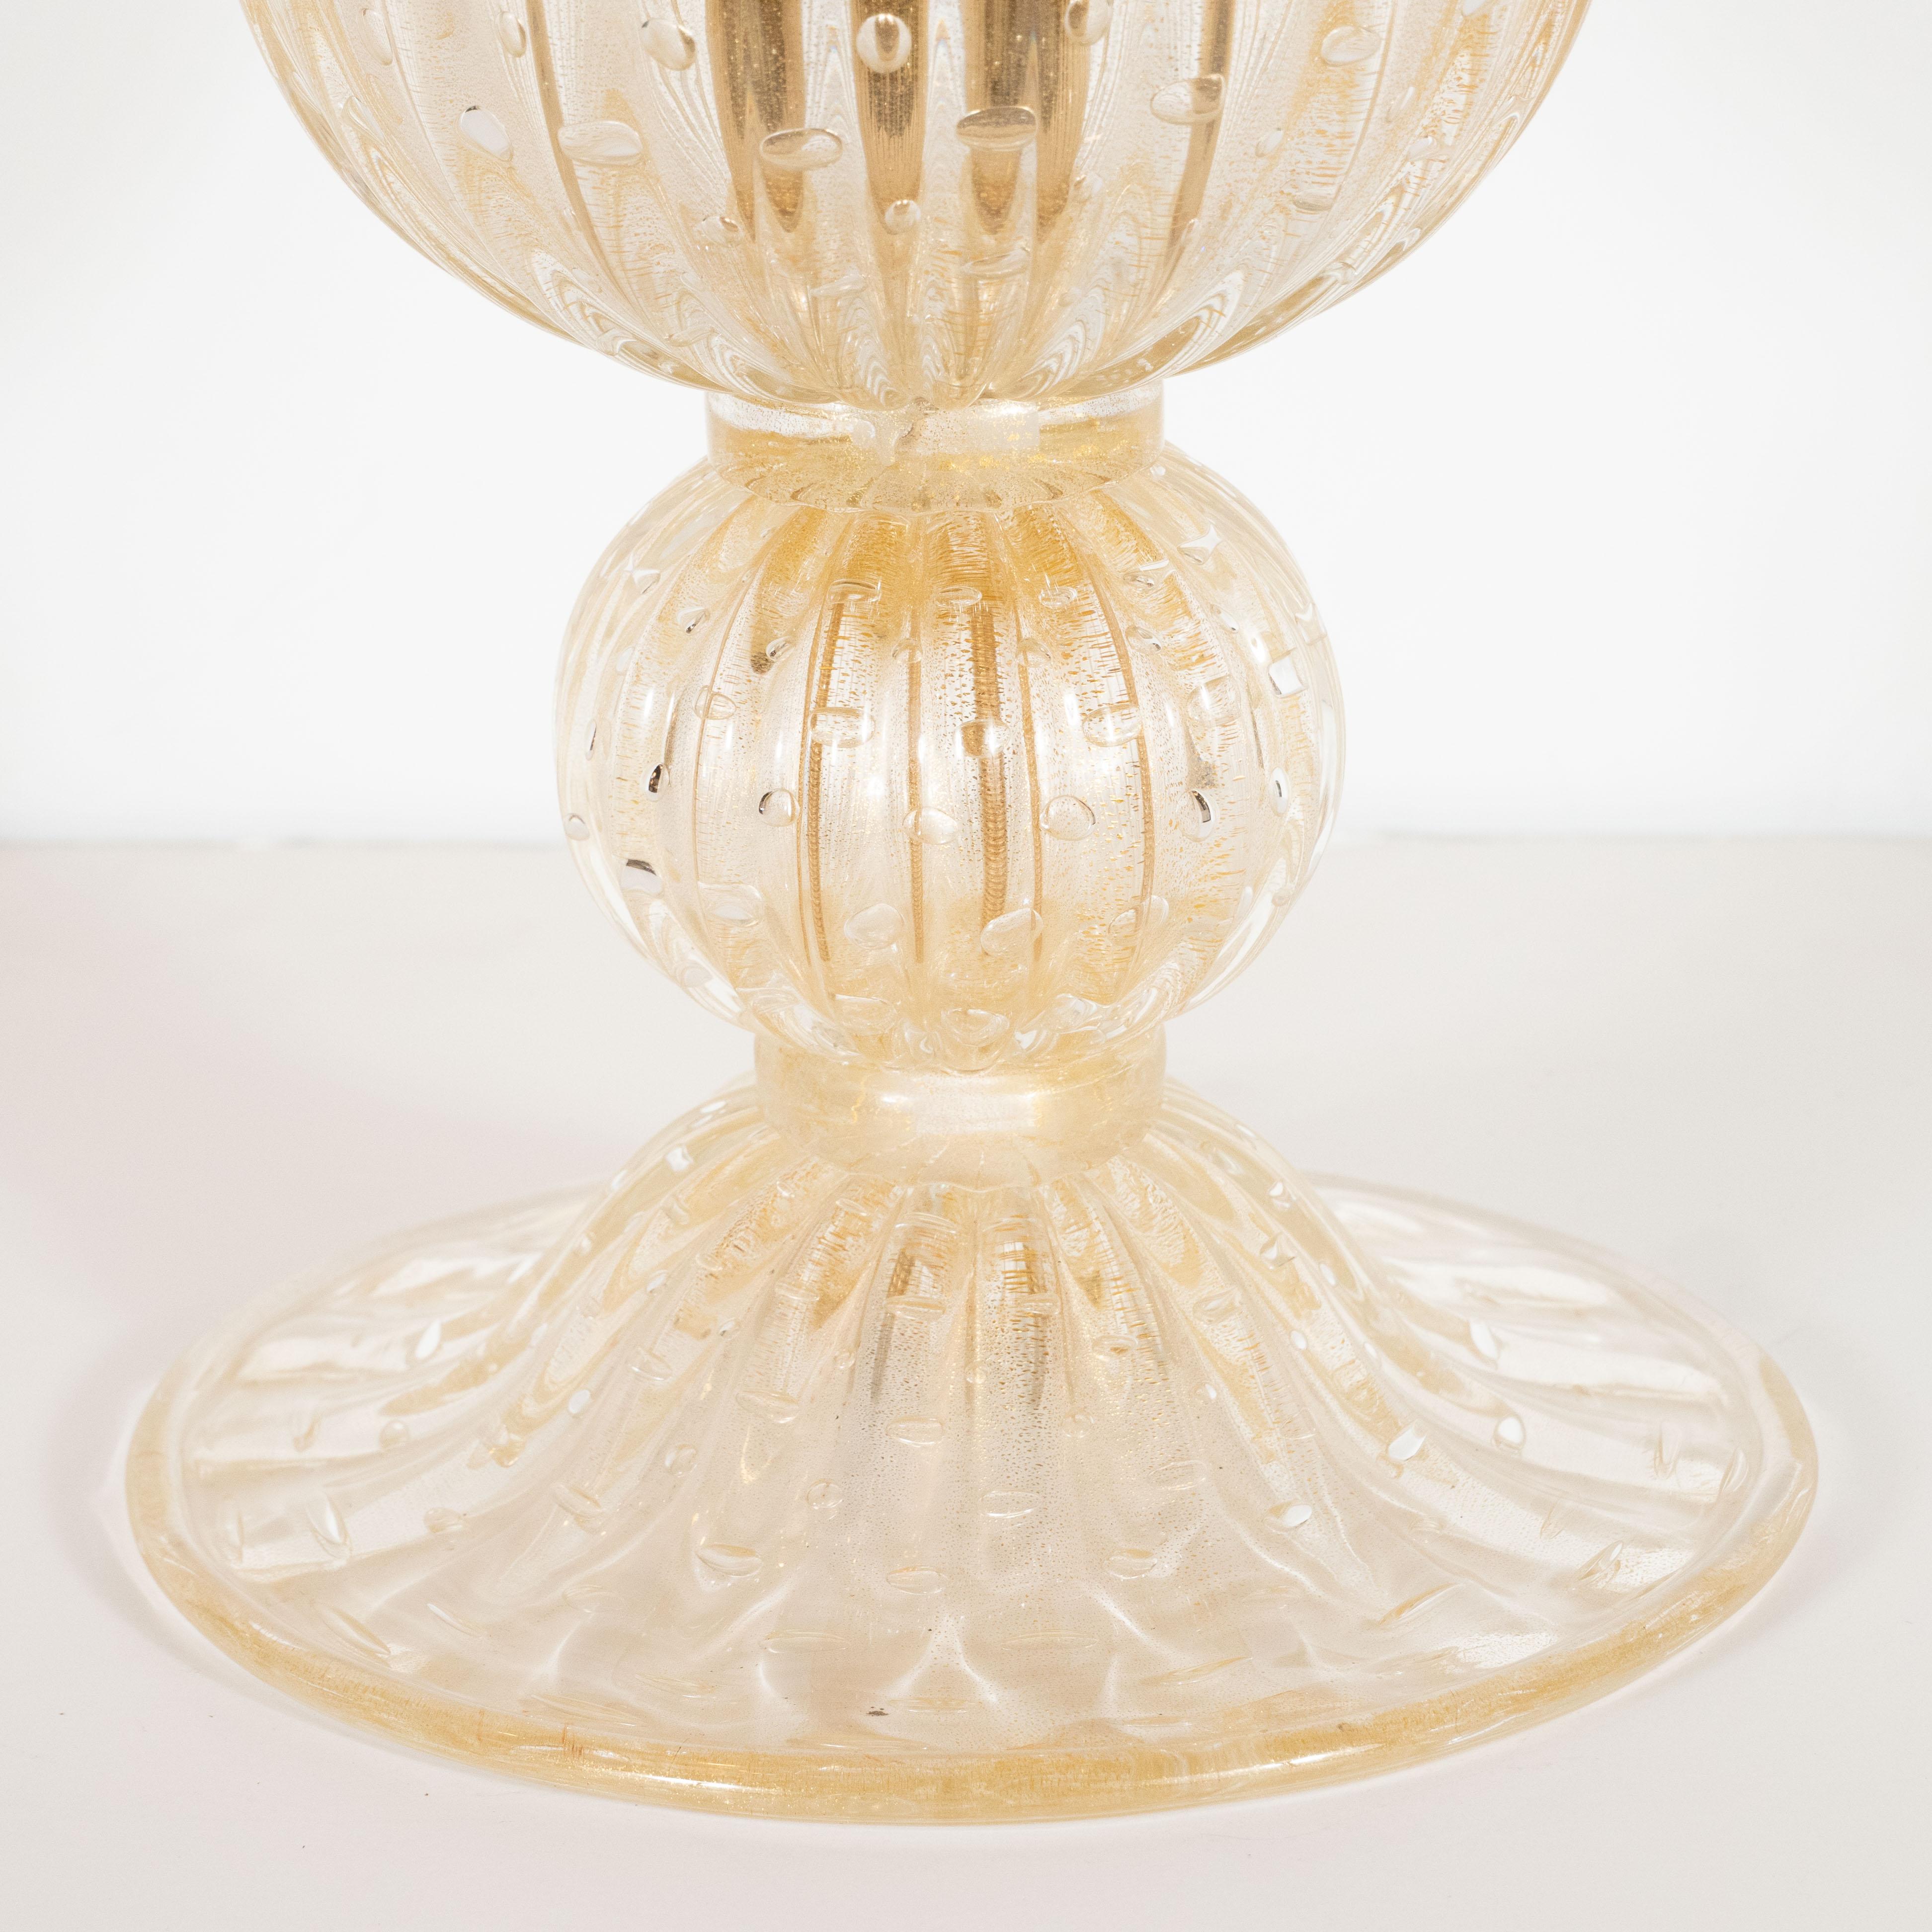 This stunning pair of uplights were hand blown in Murano, Italy- the island off the coast of Venice renowned for centuries for its superlative glass production. They feature billowing urn form shades and a subtly domed base topped with an orbital